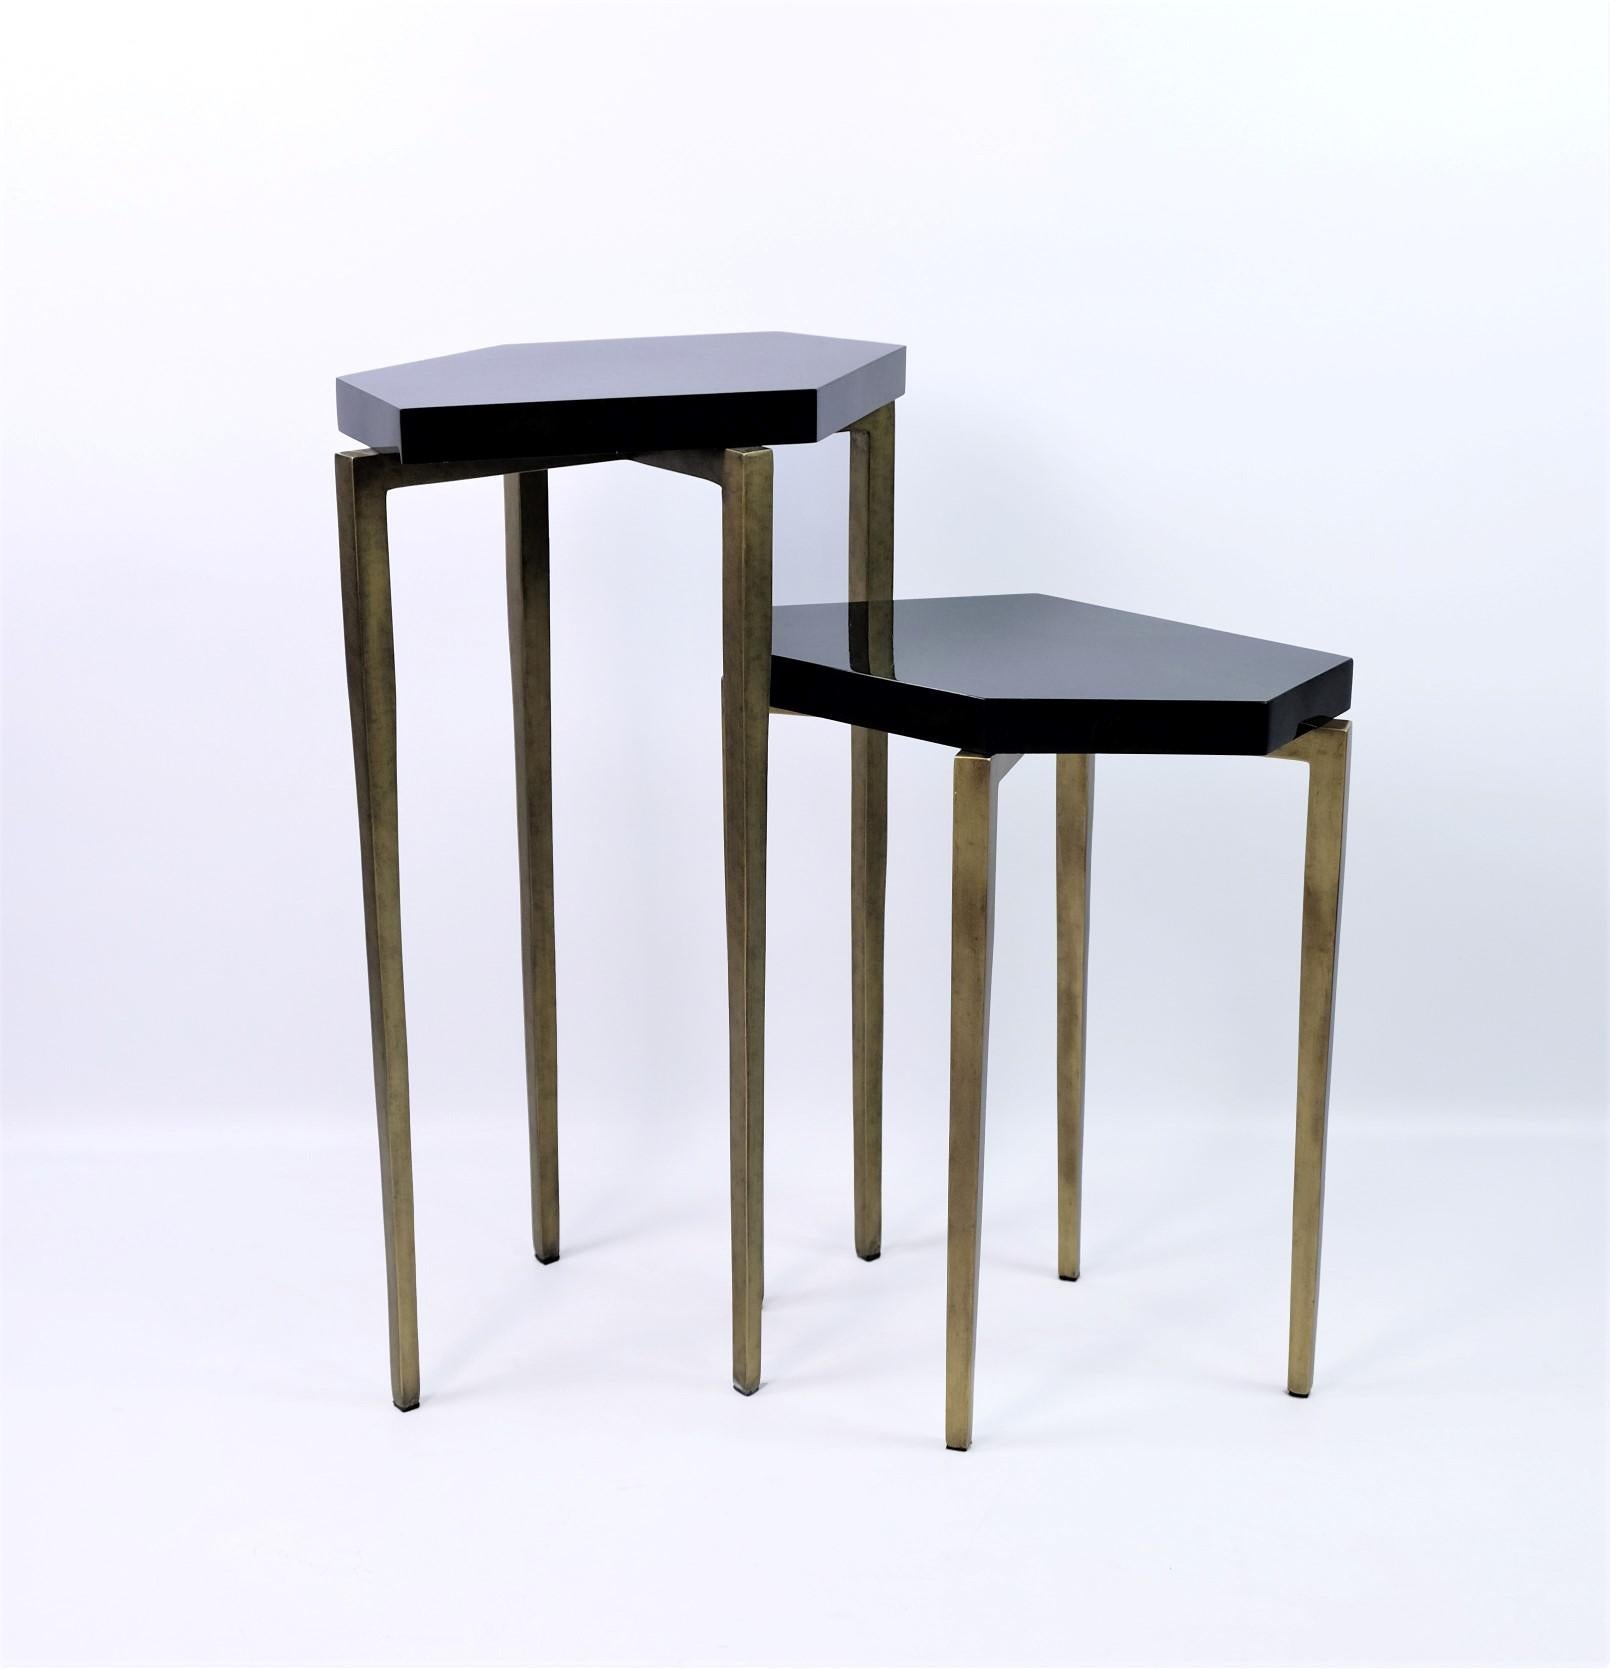 These futurist nesting tables are made of polished green penshell marquetry.

They have a polygonal shape top and the feet have an antique brass patina.

The tables are small and very versatile. These can be placed anywhere near a sofa and